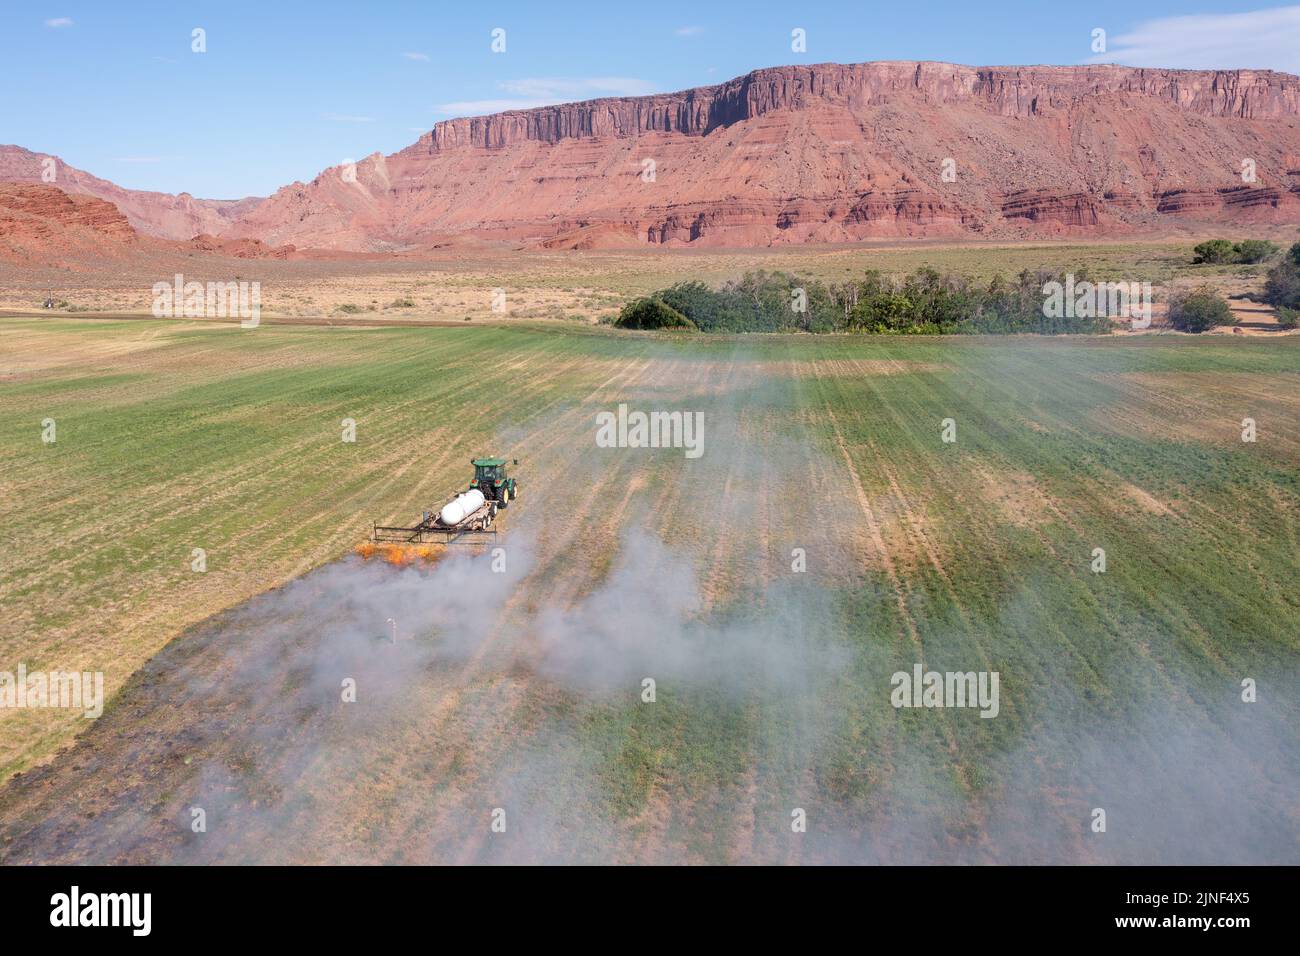 A tractor pulling a propane burner burns weeds in an hayfield after cutting the alfalfa on a ranch in Utah. Stock Photo